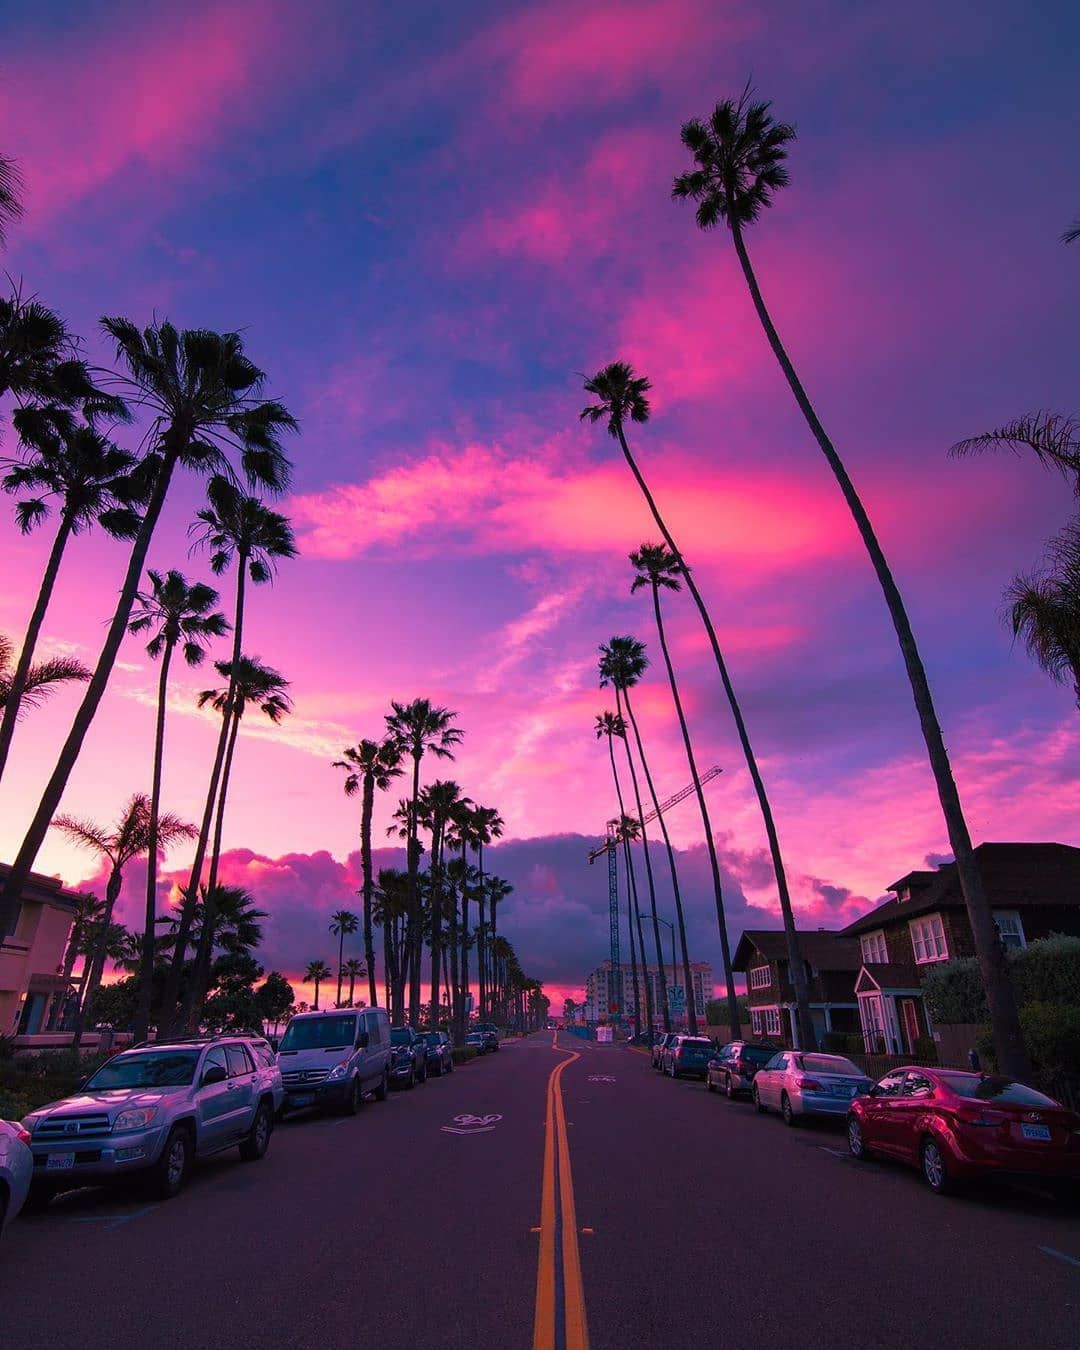 A pink and purple sunset over a palm tree lined street - Miami